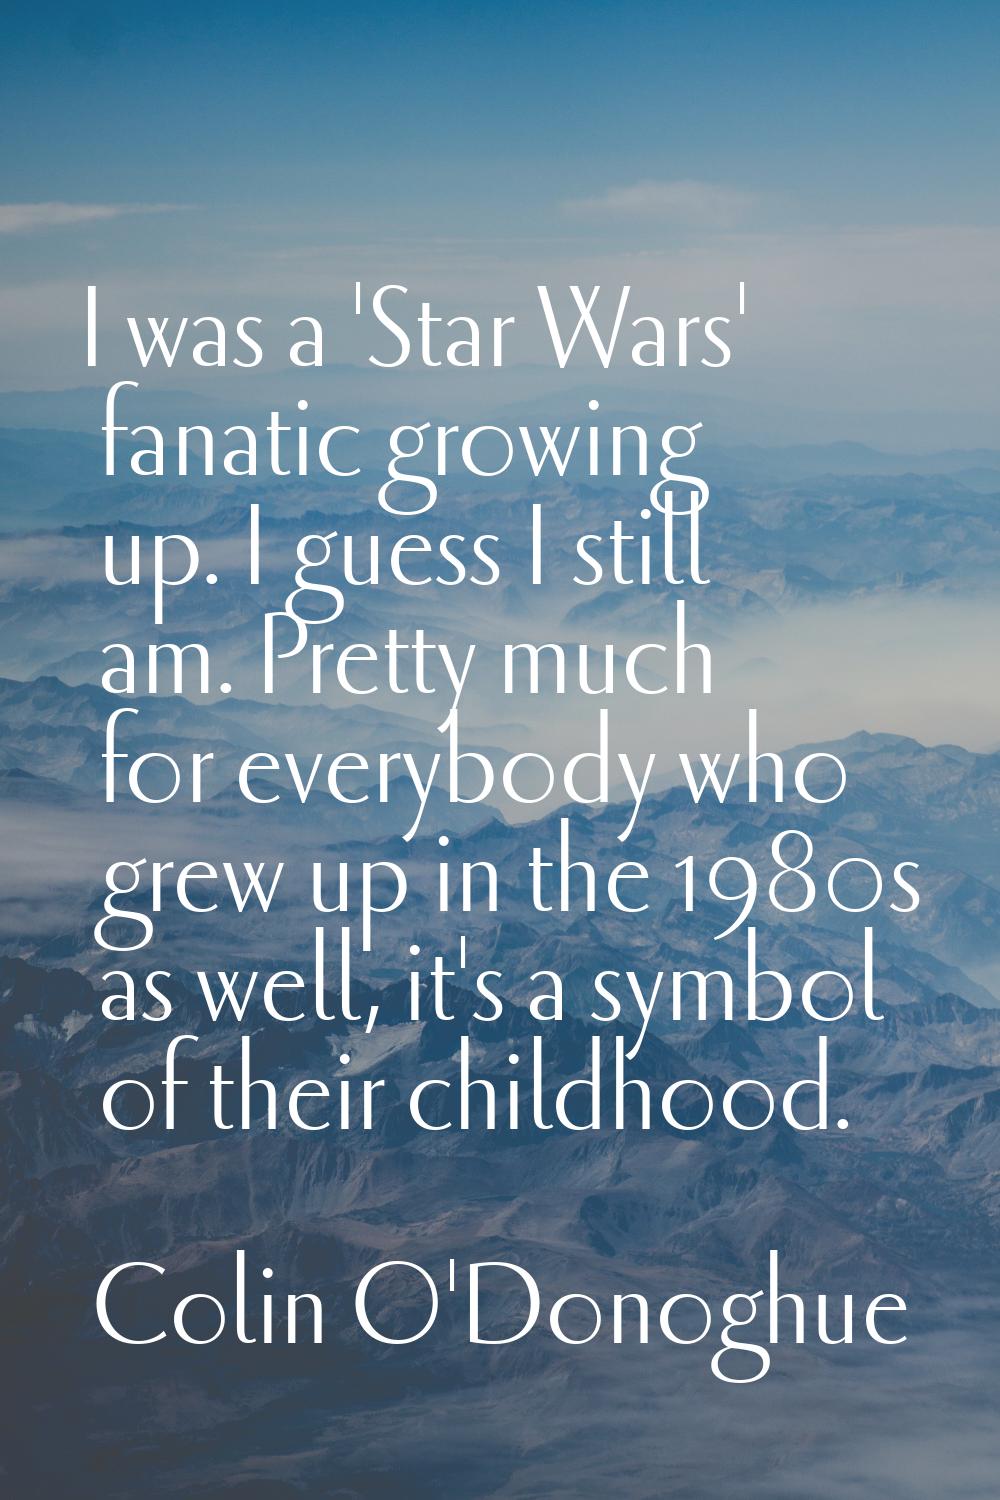 I was a 'Star Wars' fanatic growing up. I guess I still am. Pretty much for everybody who grew up i